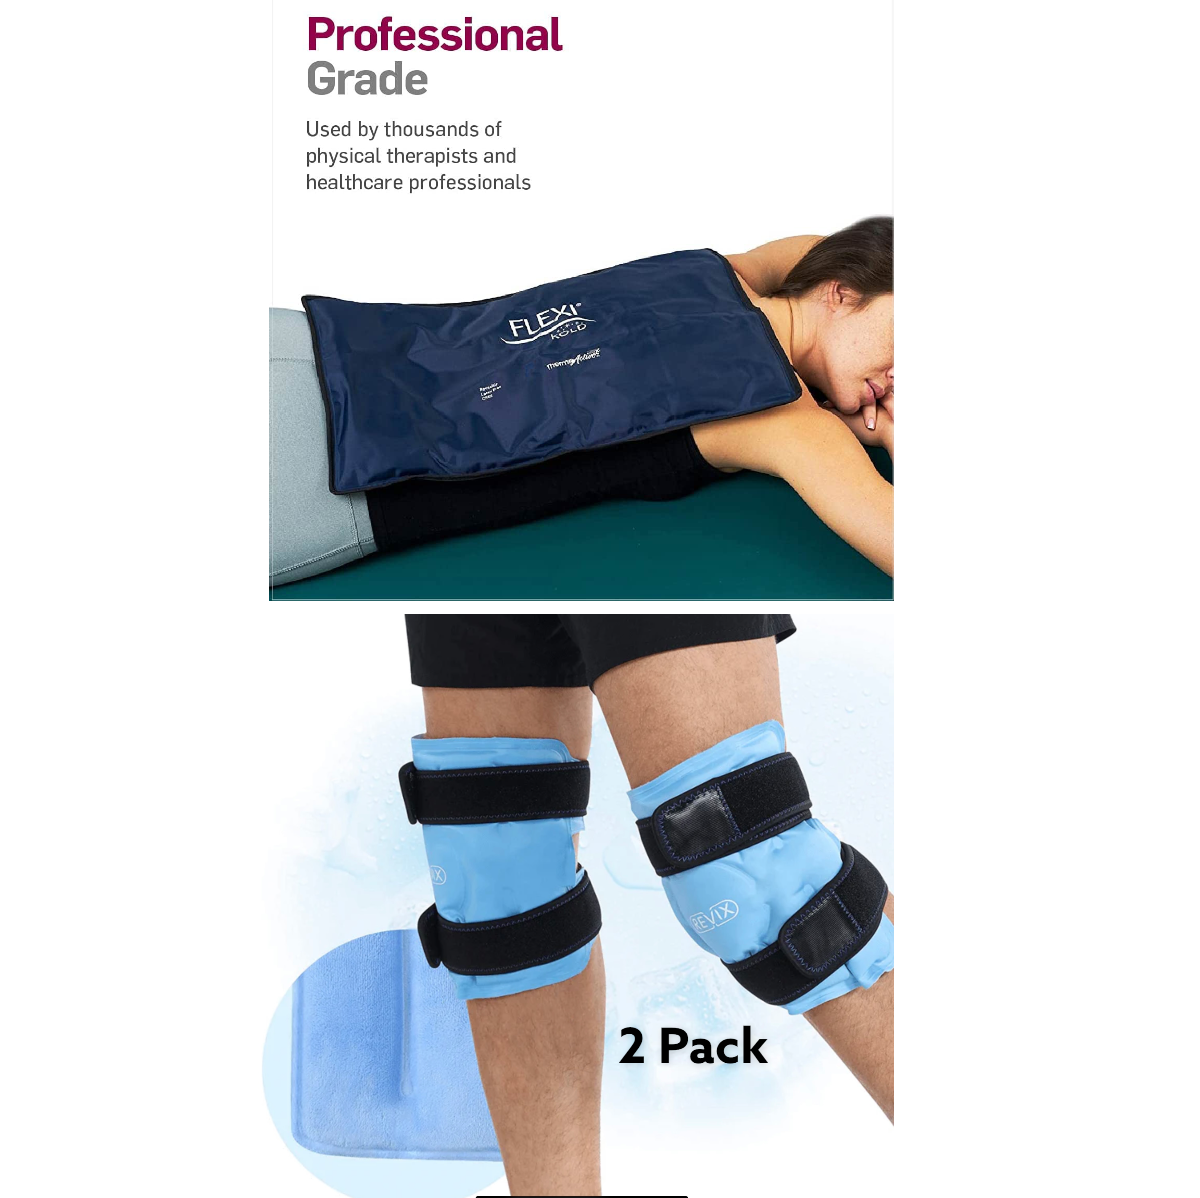 Hot & Cold Pain Relief Pads - Choose from Extra Large Reusable Gel Pack (GREAT for treating your ENTRIE back or a 2-Pack of Knee Gel Pads - Unique gel allows for COLD or HOT treatment! - SHIPS FREE!